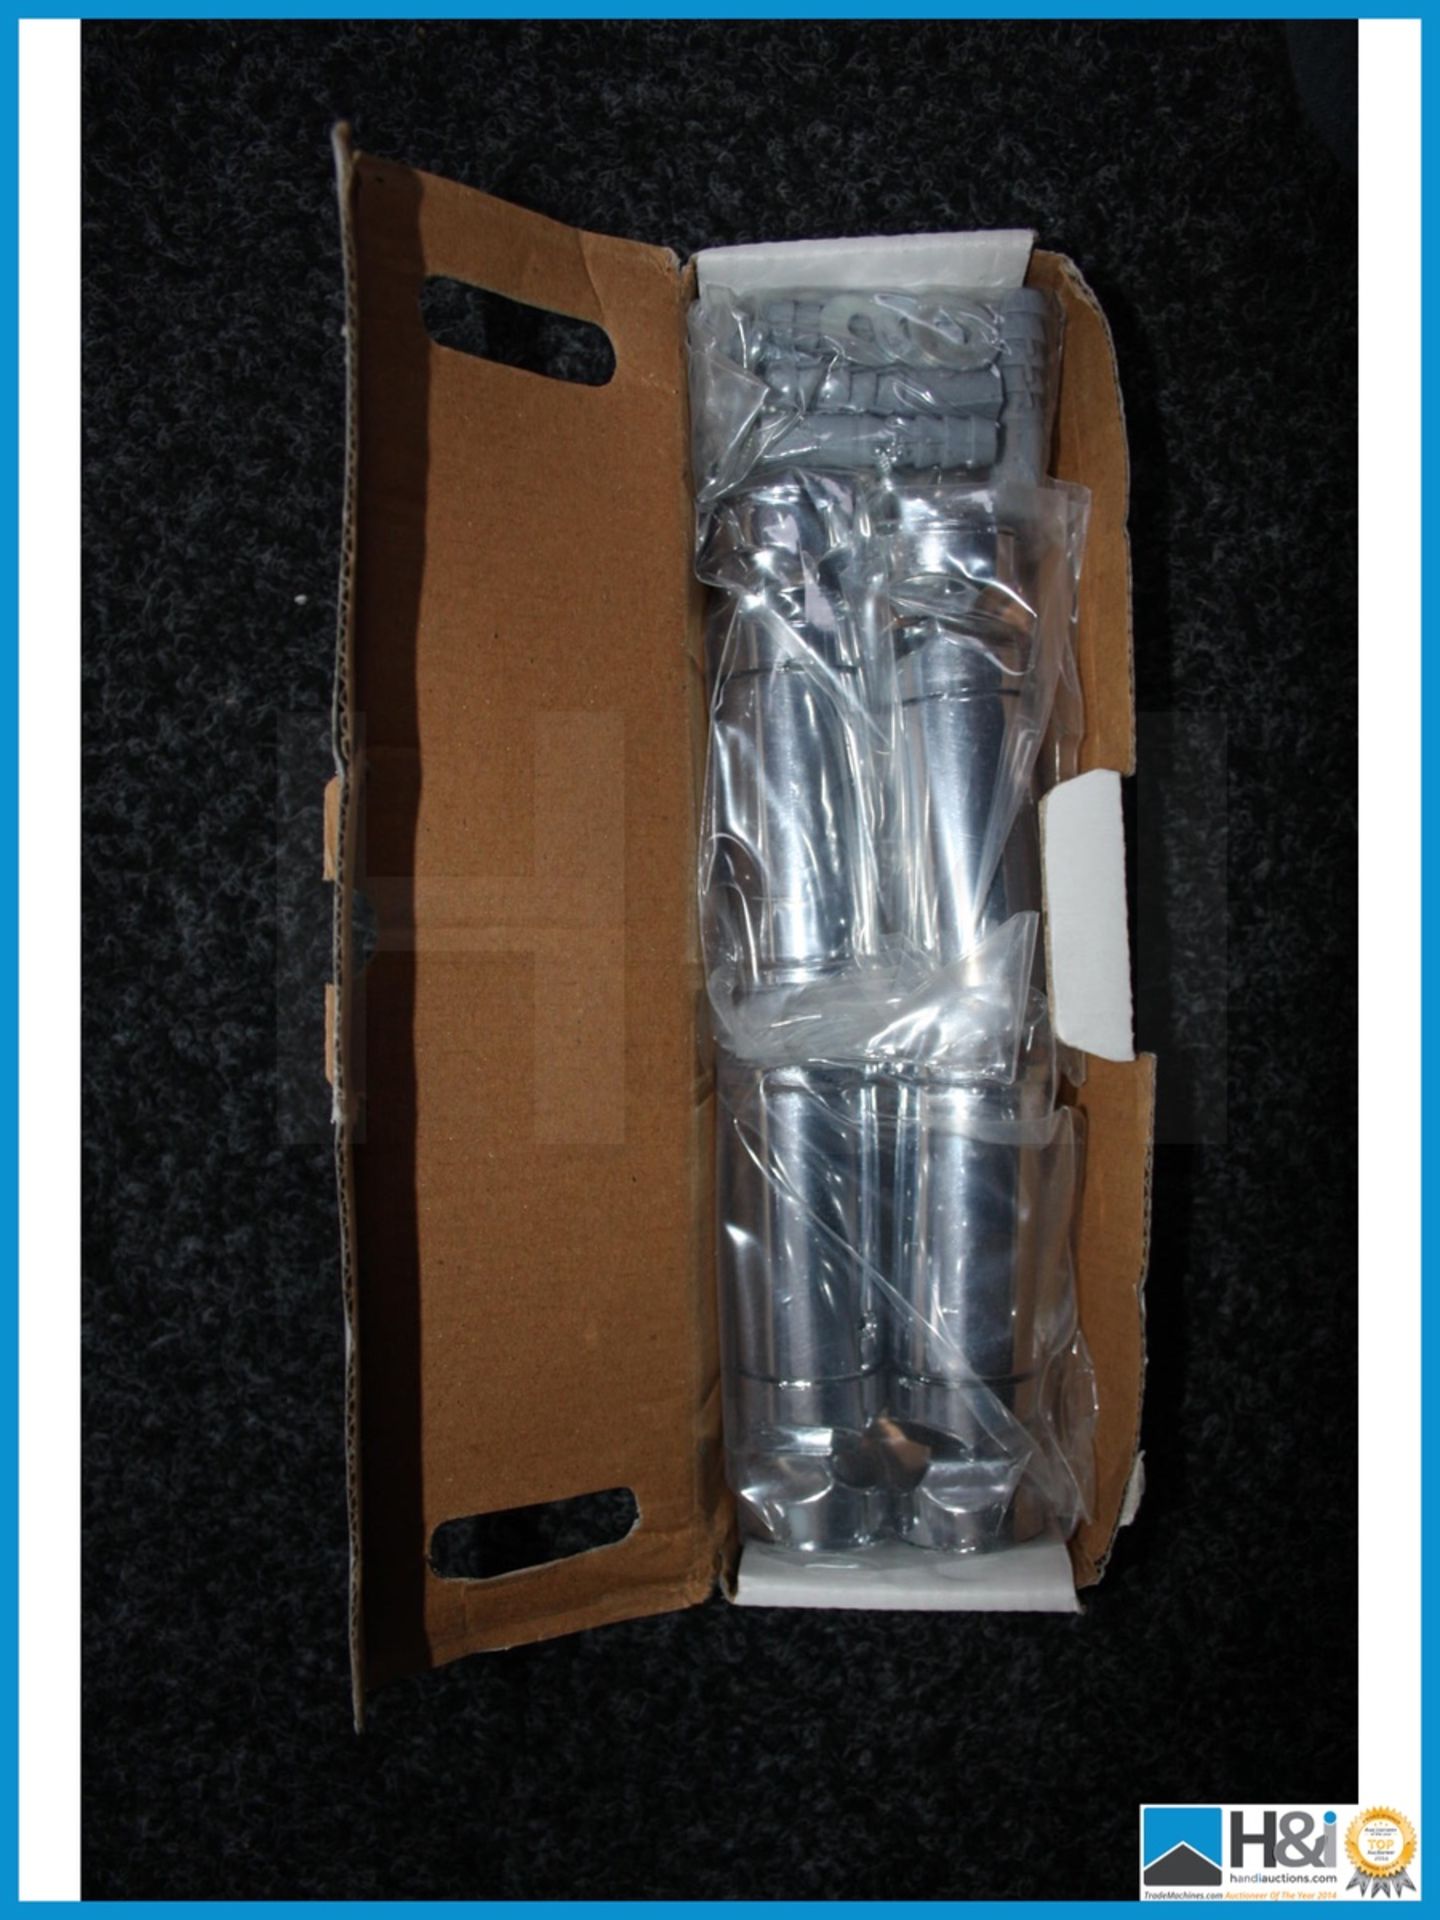 Chrome heated towel rail with fittings unused and boxed 760 x 400 mm. Appraisal: Viewing Essential - Image 3 of 3